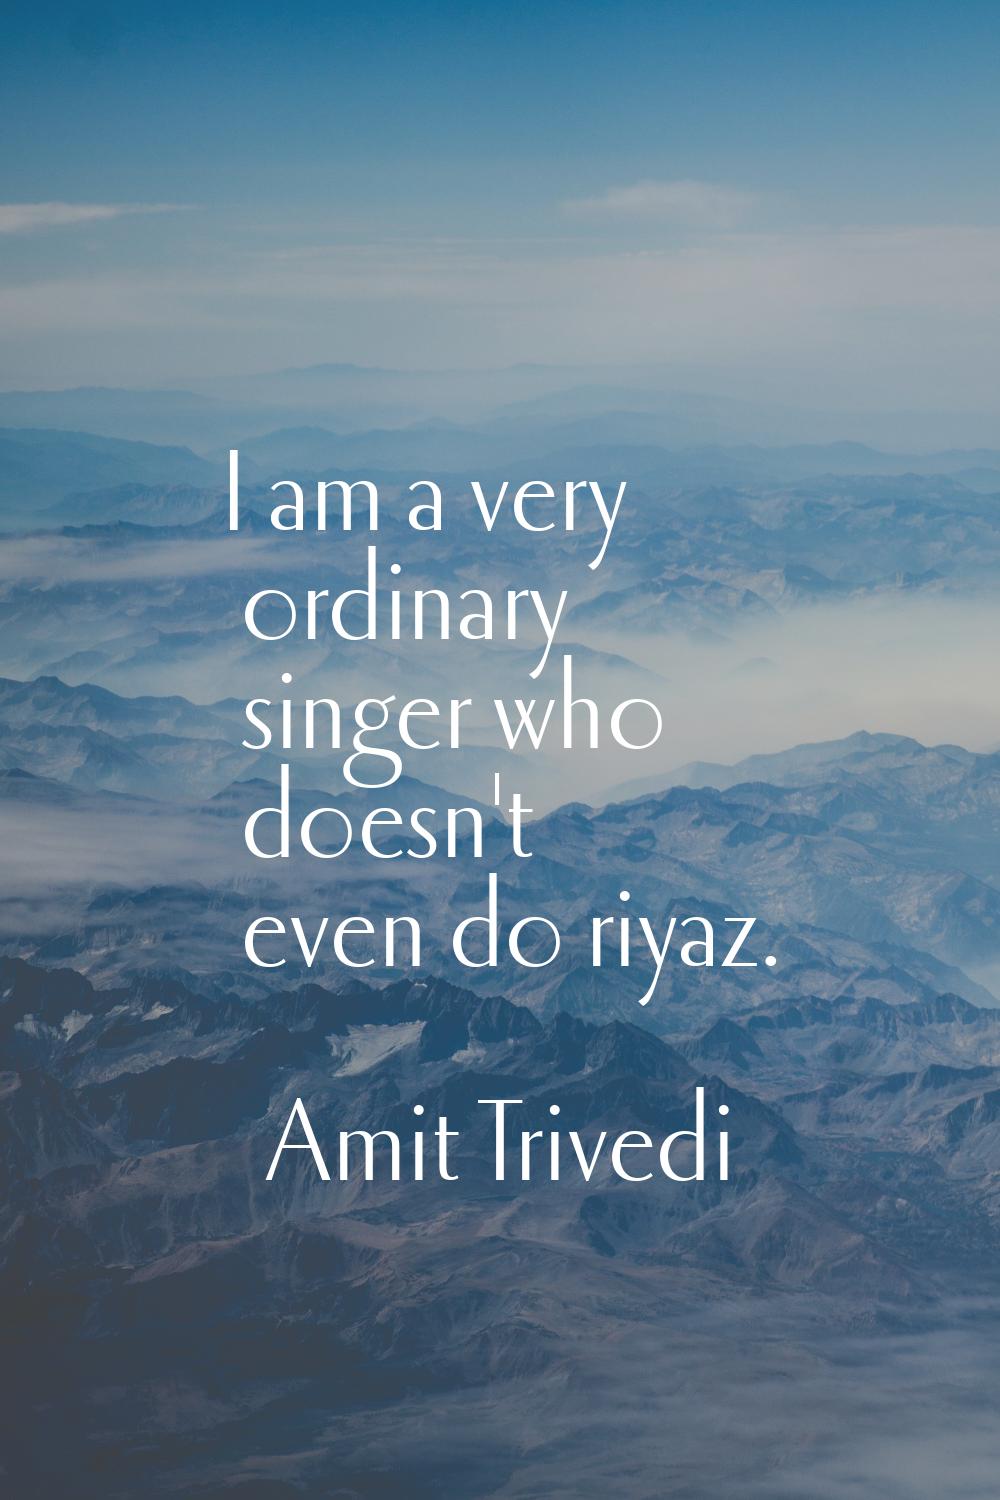 I am a very ordinary singer who doesn't even do riyaz.